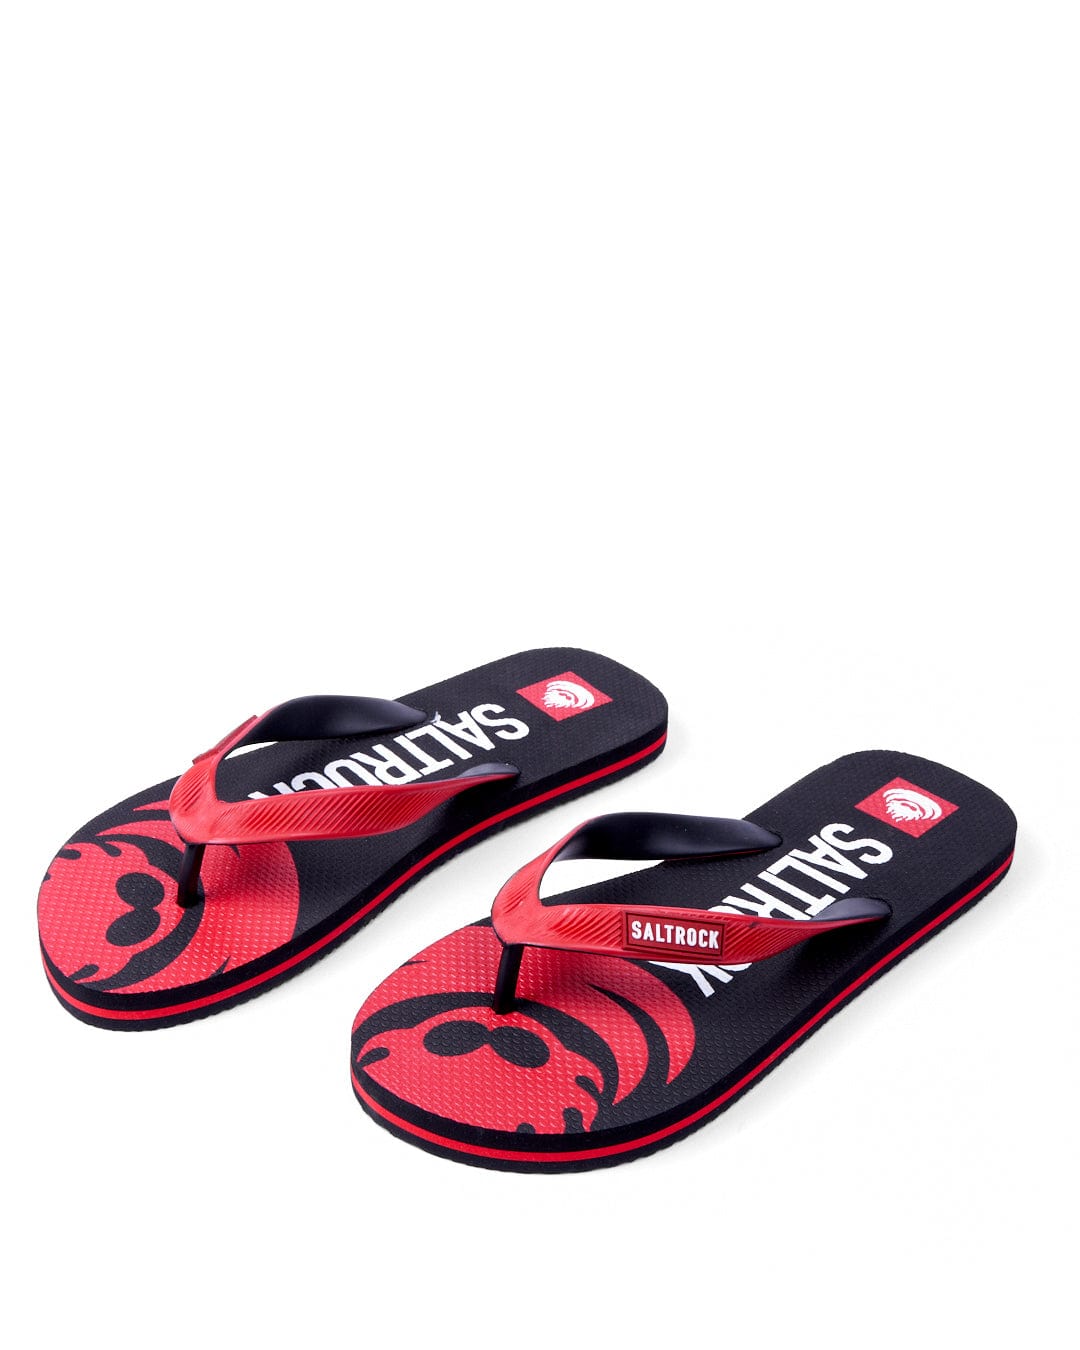 A pair of Saltrock Corp Flame flip-flops with red footbeds featuring large flamehead skulls, black straps, and the brand name in white letters.